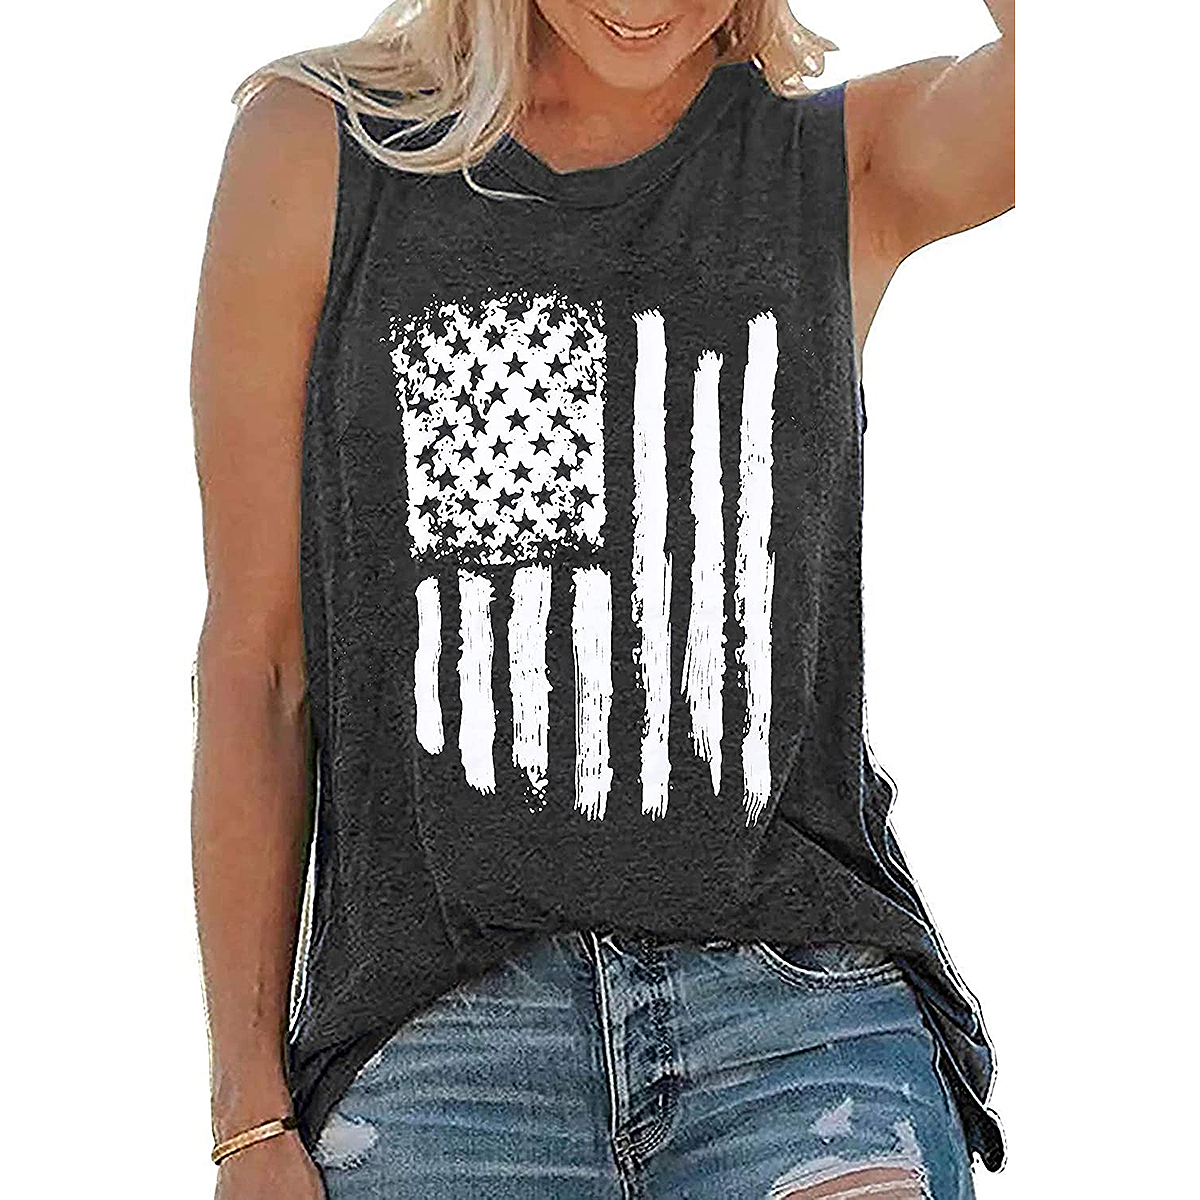 4th of July Tops — 11 Fun and Festive Picks Starting at Just $7